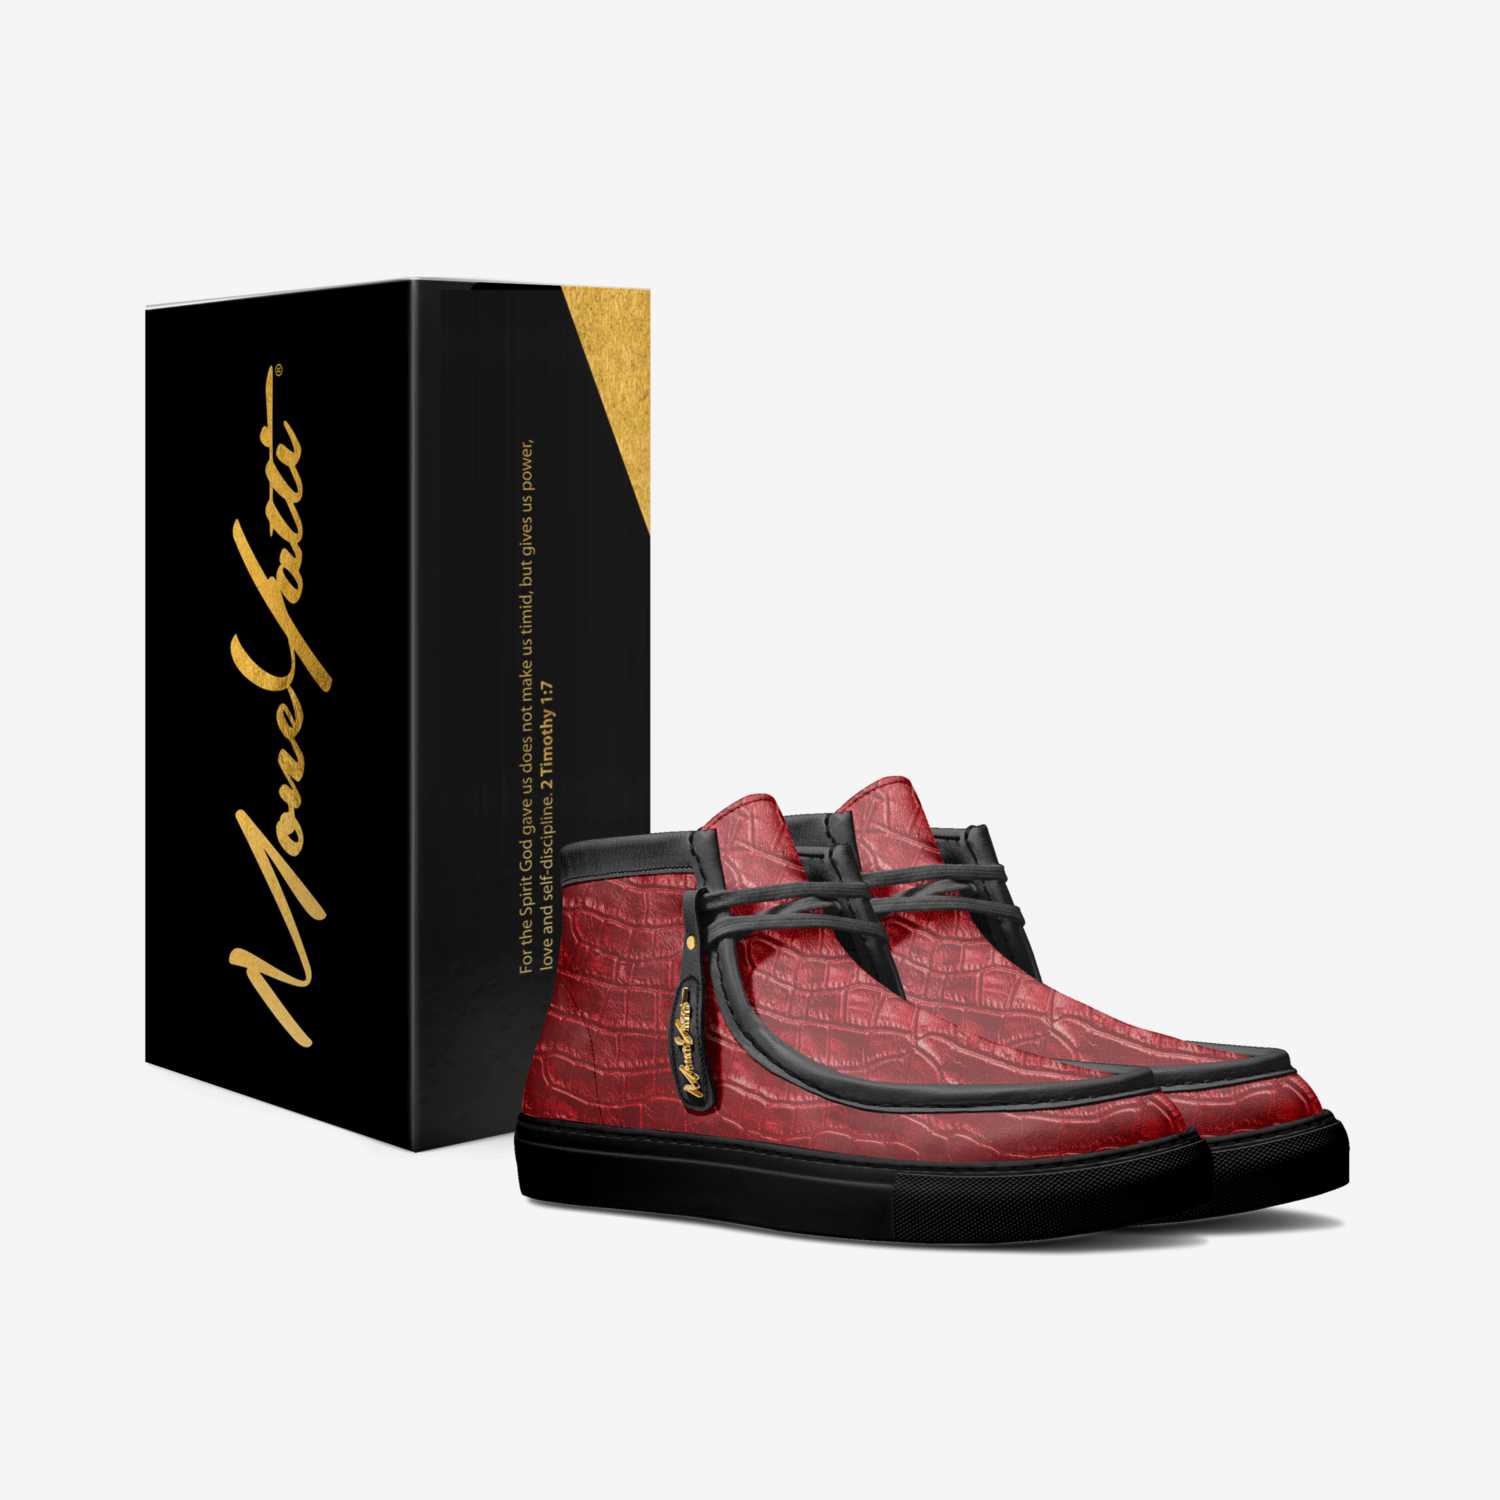 LUX 022 custom made in Italy shoes by Moneyatti Brand | Box view